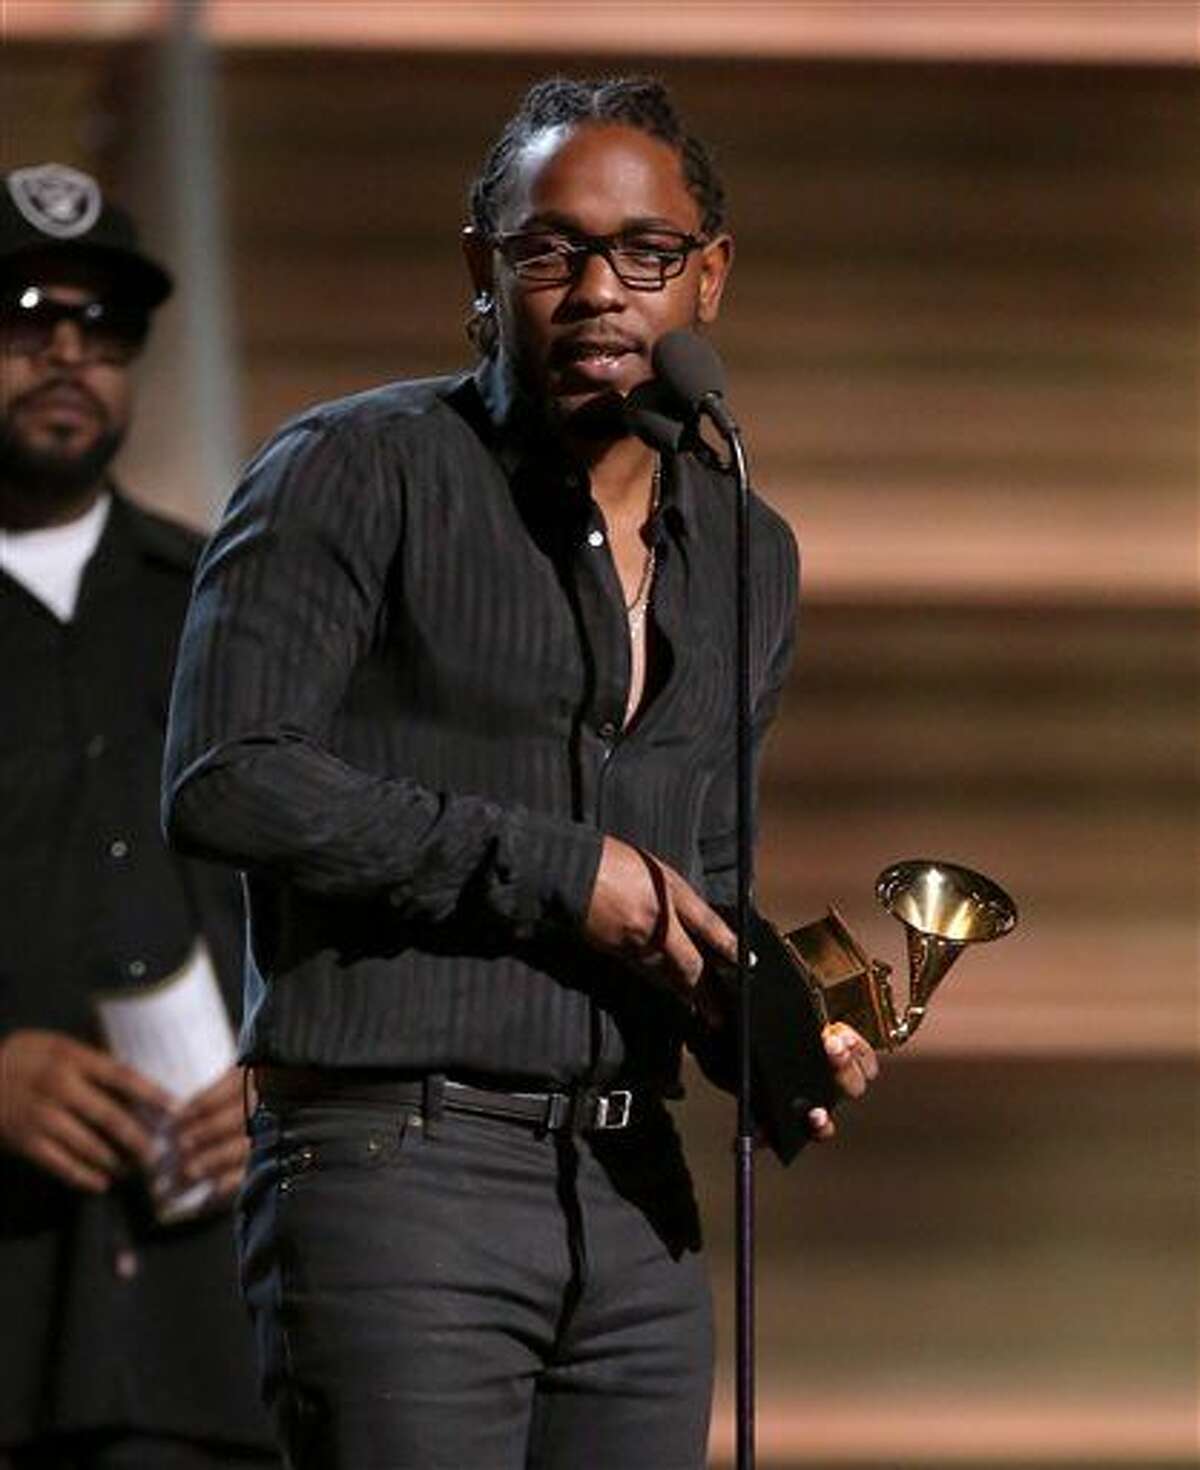 Kendrick Lamar accepts the award for best rap album for “To Pimp A Butterfly” at the 58th annual Grammy Awards on Monday, Feb. 15, 2016, in Los Angeles.